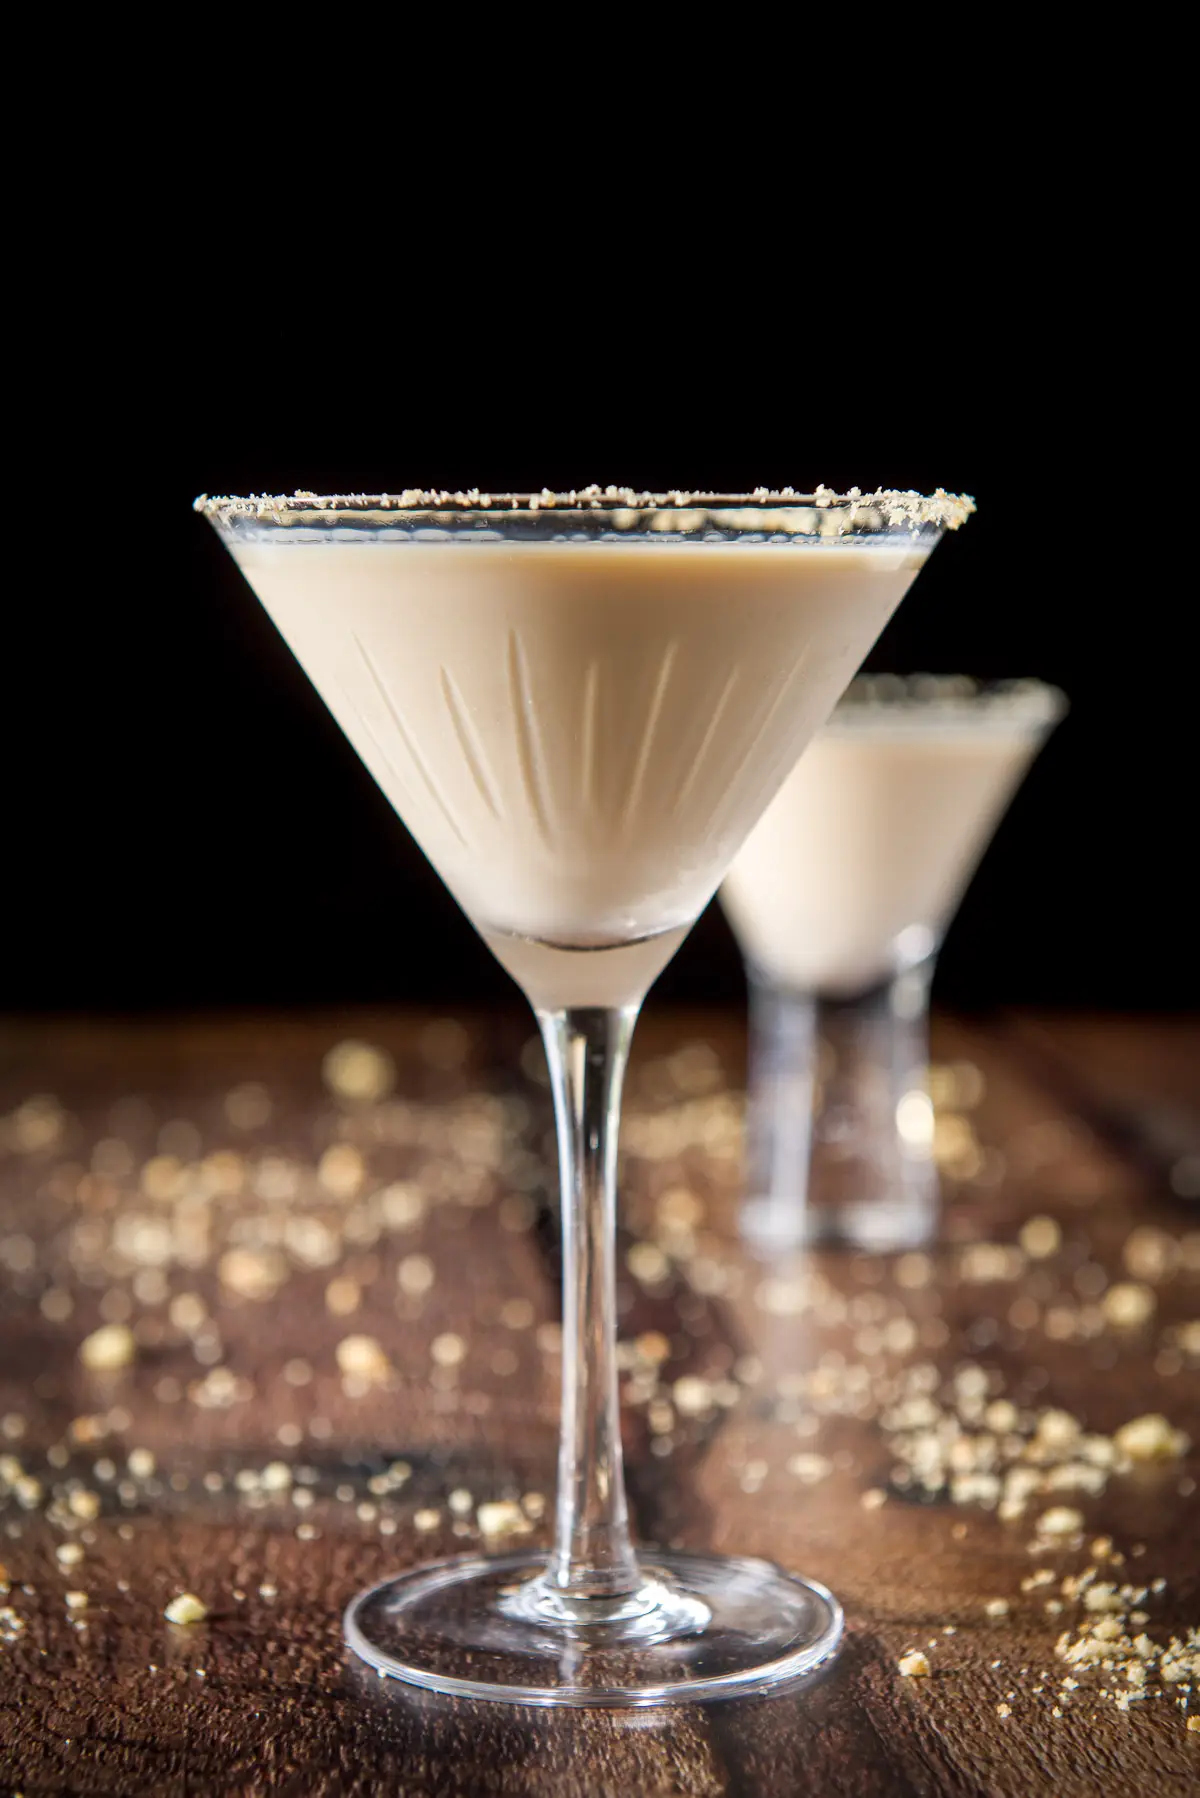 Vertical view of the classic martini glass in front of the smaller glass with the cream drink. There are cookie crumbs on the table